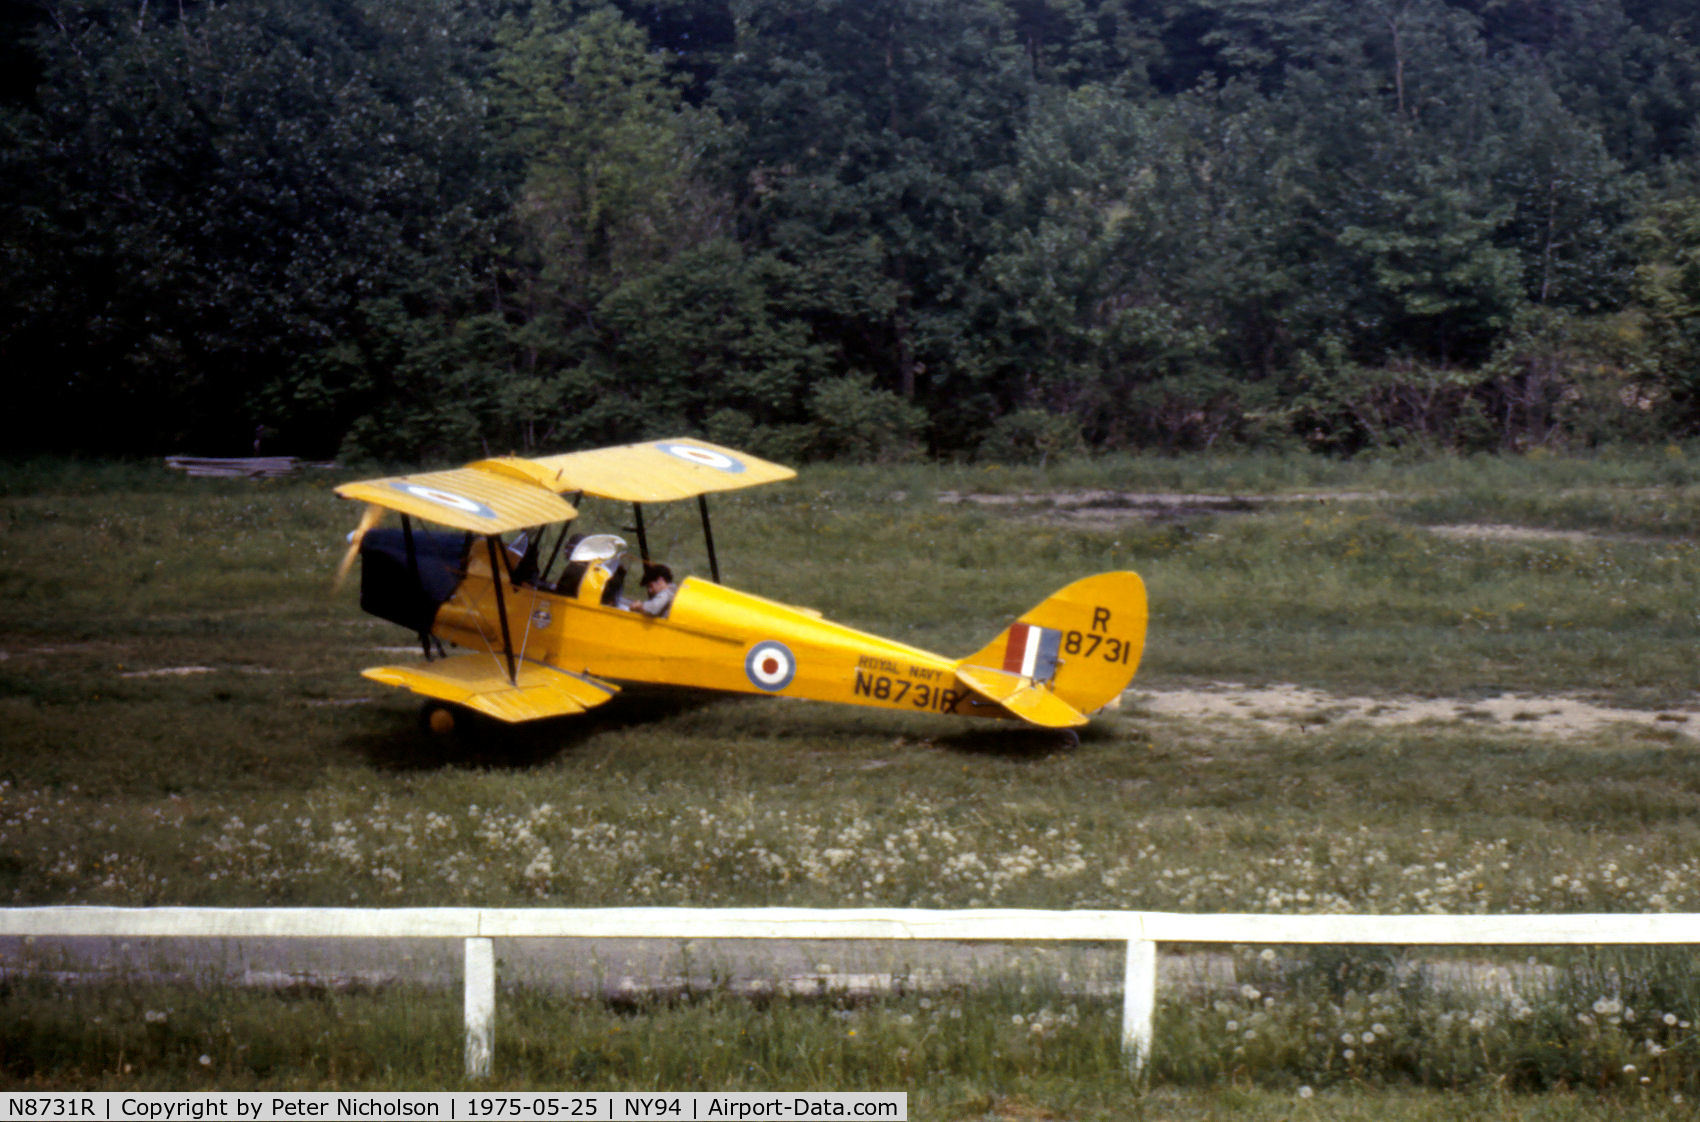 N8731R, 1941 De Havilland Canada DH-82C Tiger Moth C/N DHC1848, DH-82C Tiger Moth of Cole Palen's Rhinebeck collection in action at the 1975 Airshow.